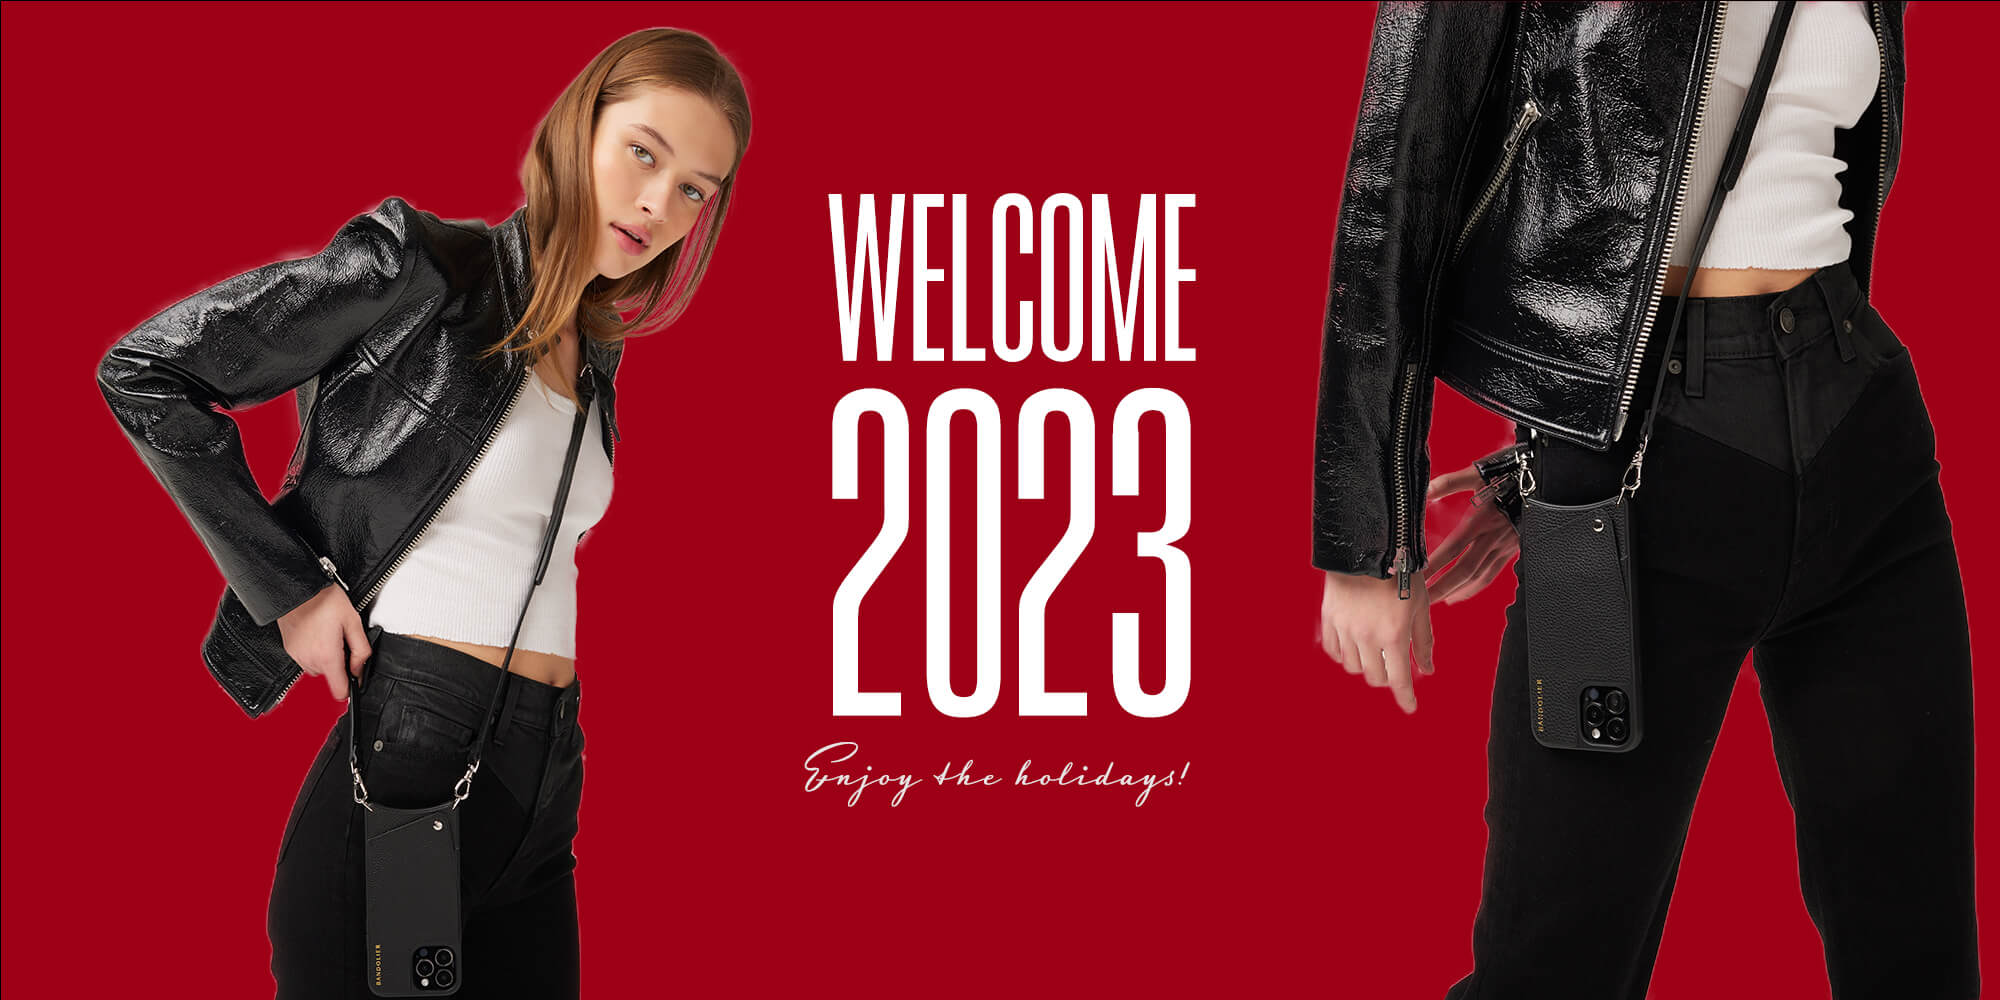 WELCOME 2023